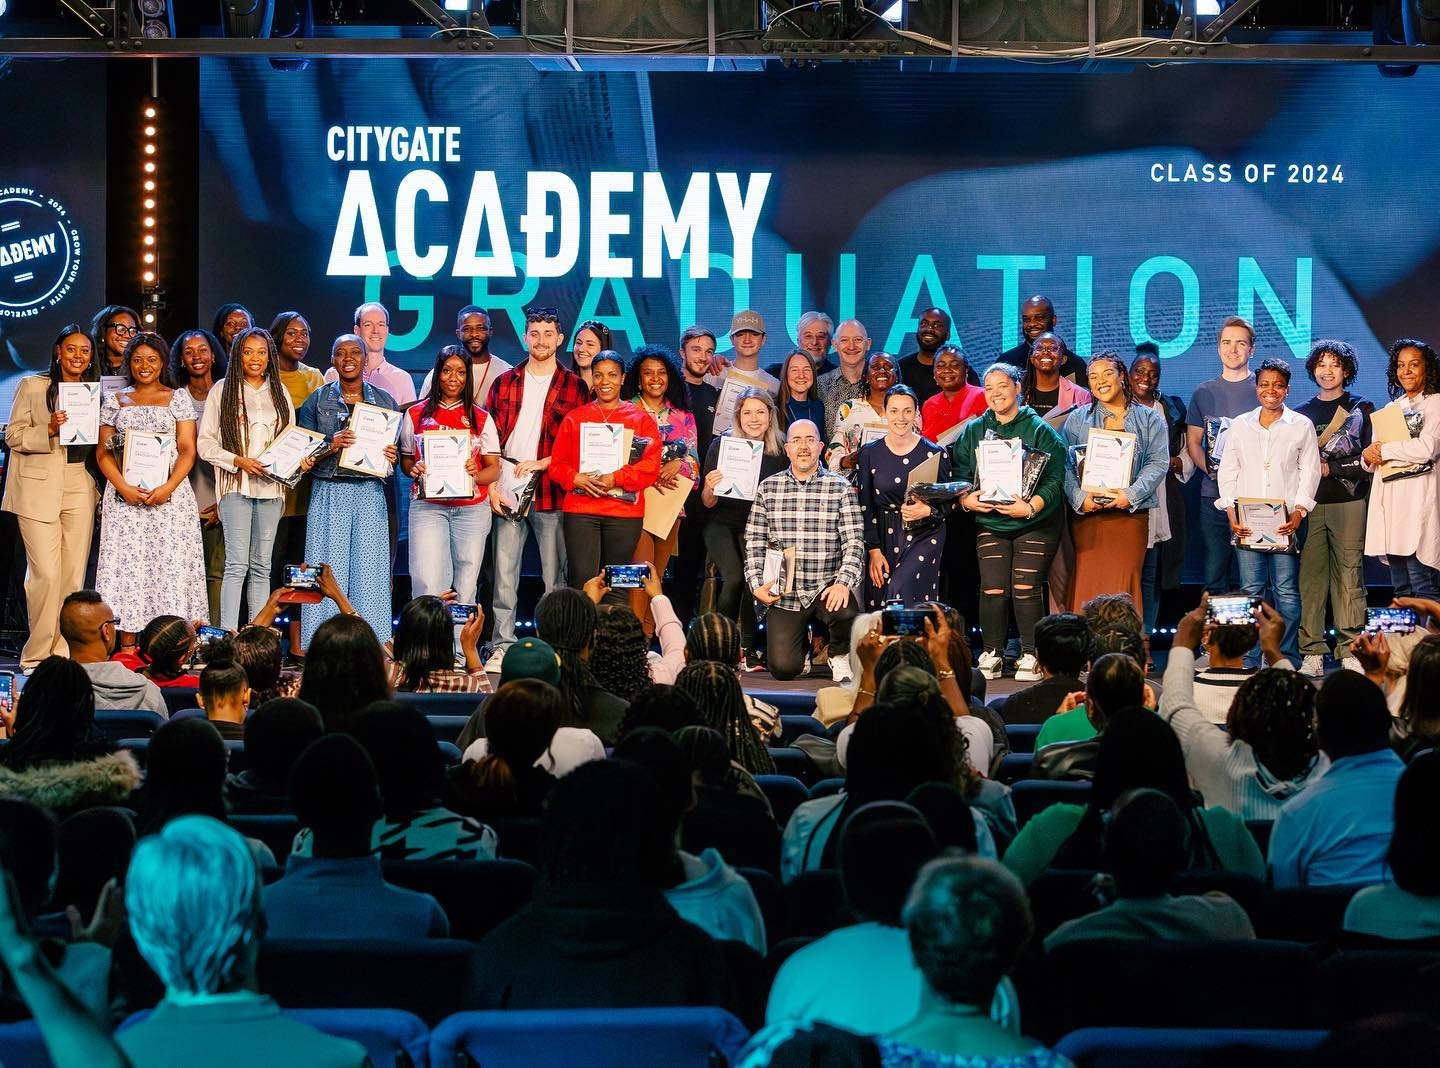 Can we get a shout out to our ACADEMY CLASS OF 2024! 
What a great Sunday to recognise and celebrate such a phenomenal group of people who have dedicated themselves to the study of the Word of God this last year. We love seeing what God is doing in y